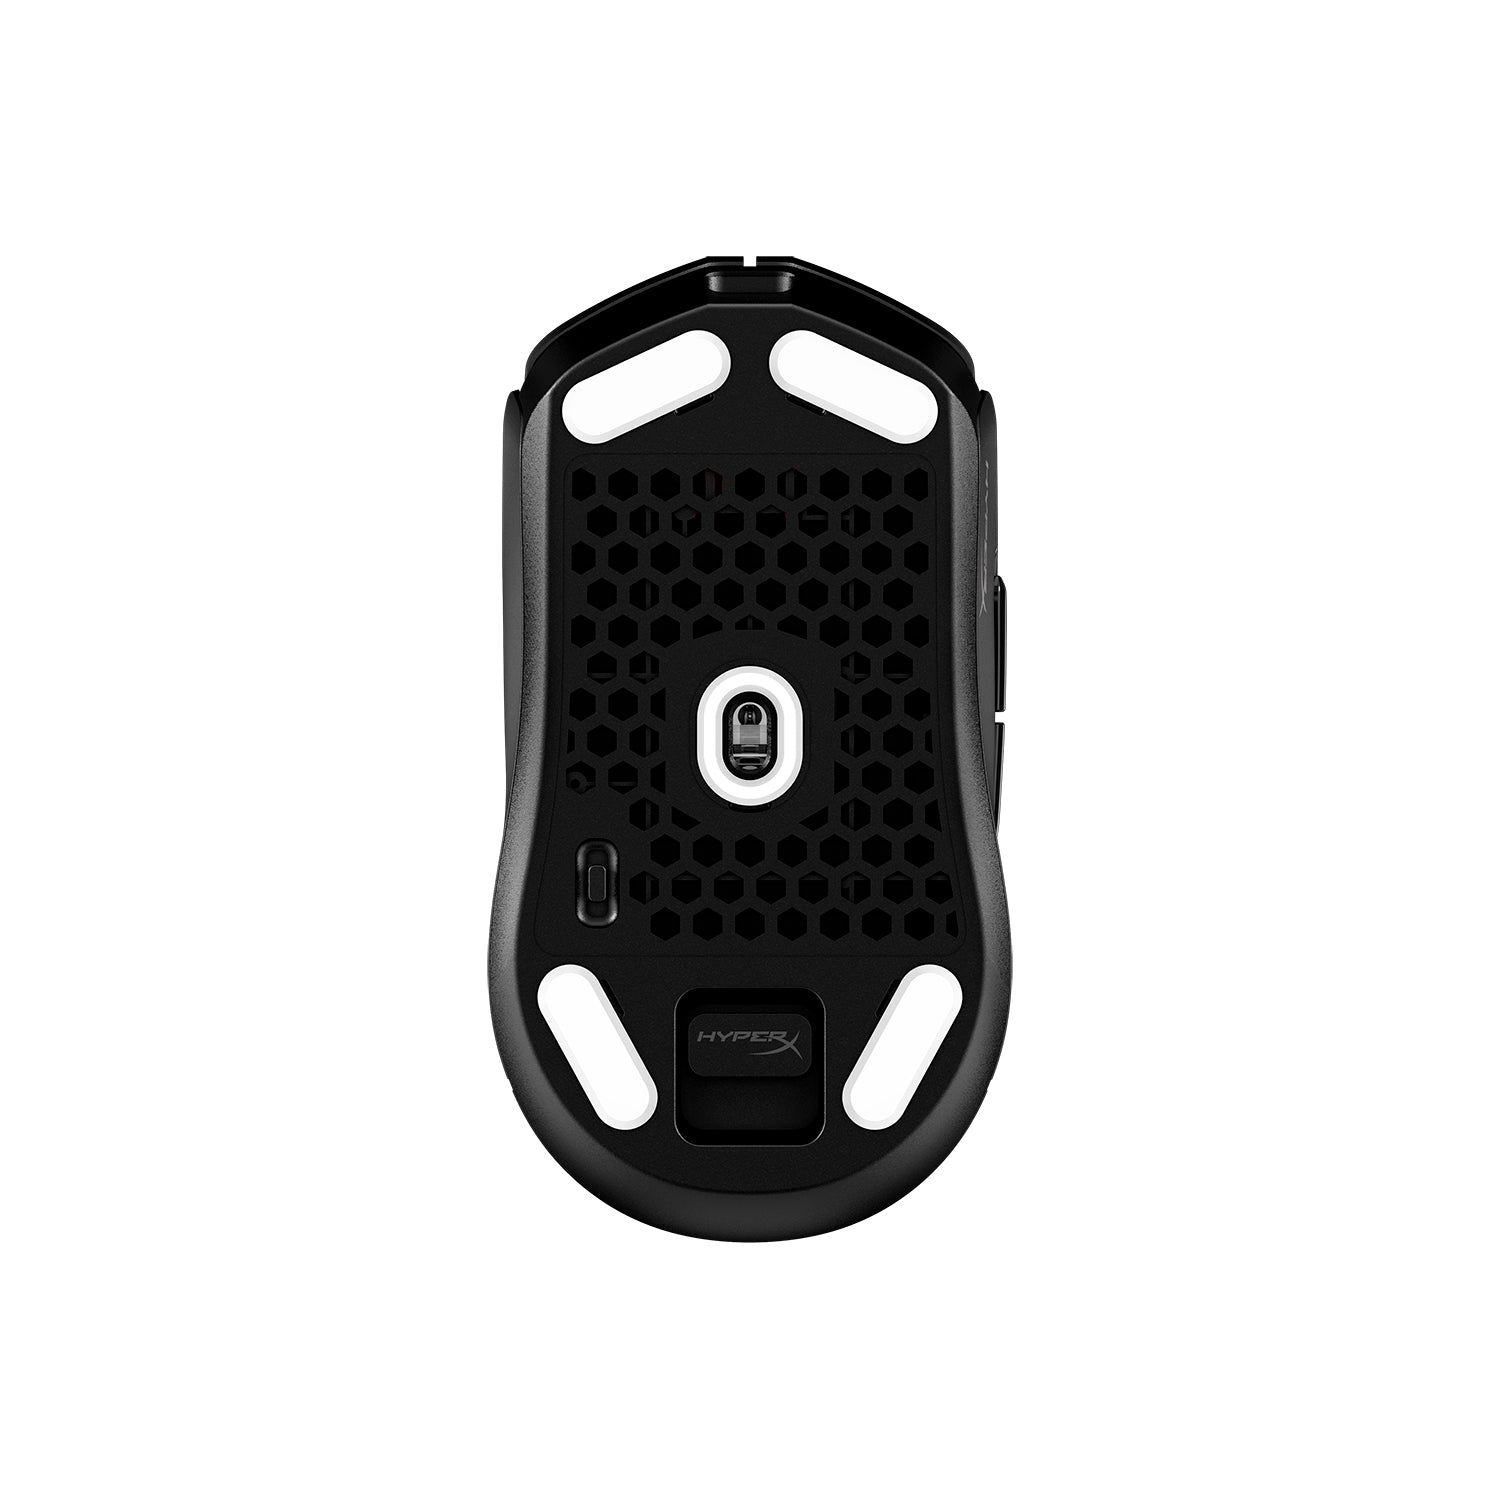 HyperX Pulsefire Haste 2 Mini Wireless Black Gaming Mouse - view from the bottom side